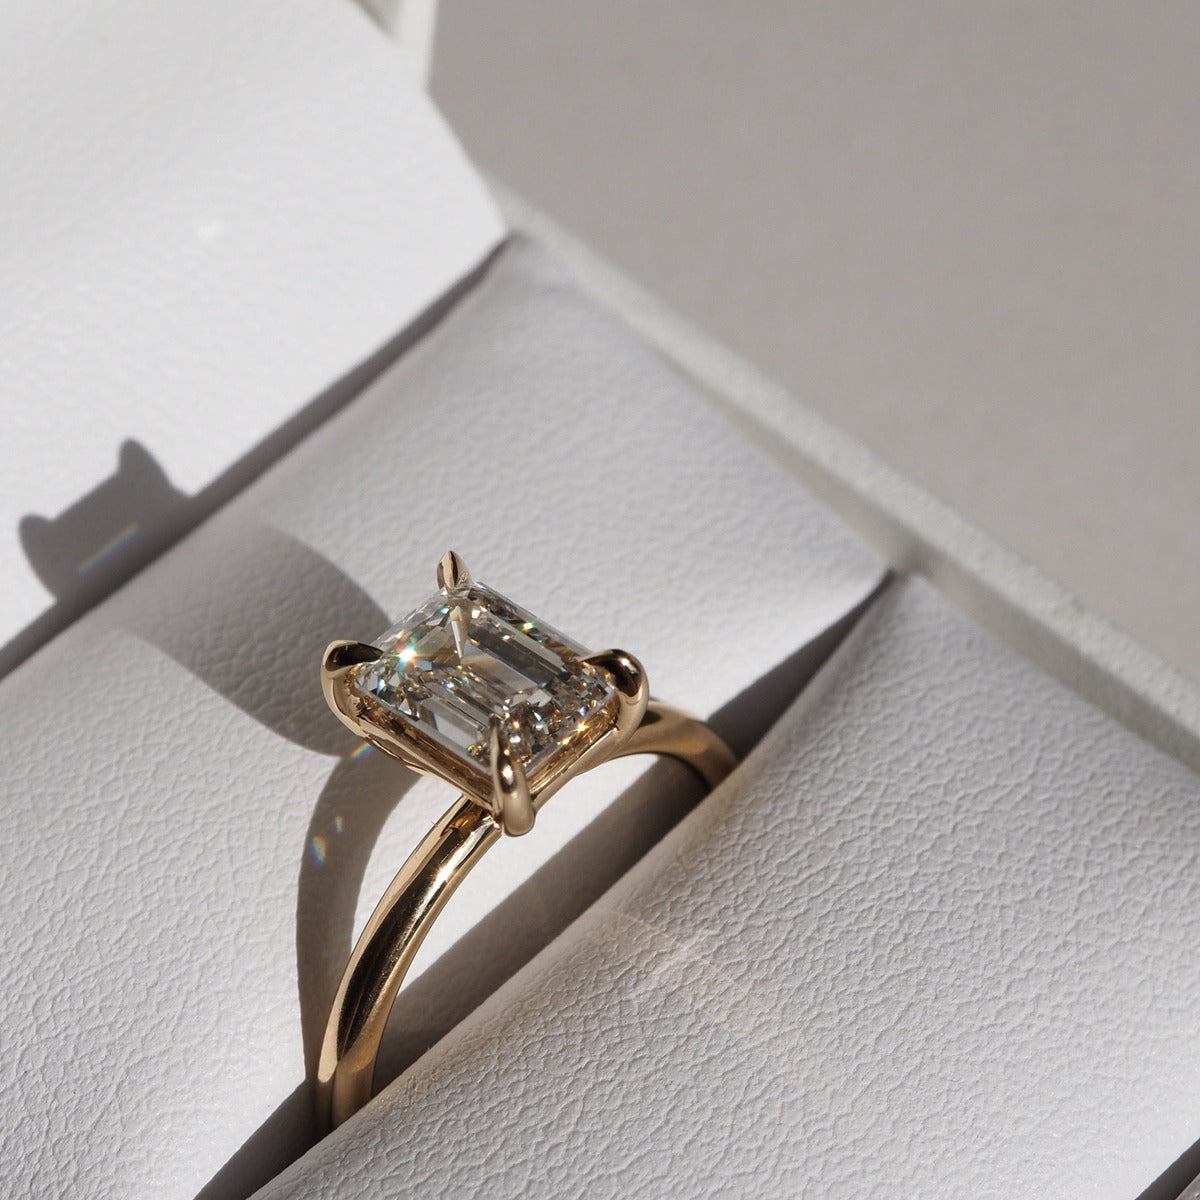 Simple, elegant and perfectly set. Eva features a beautiful emerald cut lab-grown diamond, held within a basket setting by four subtle talon claws. 18ct solid yellow gold 